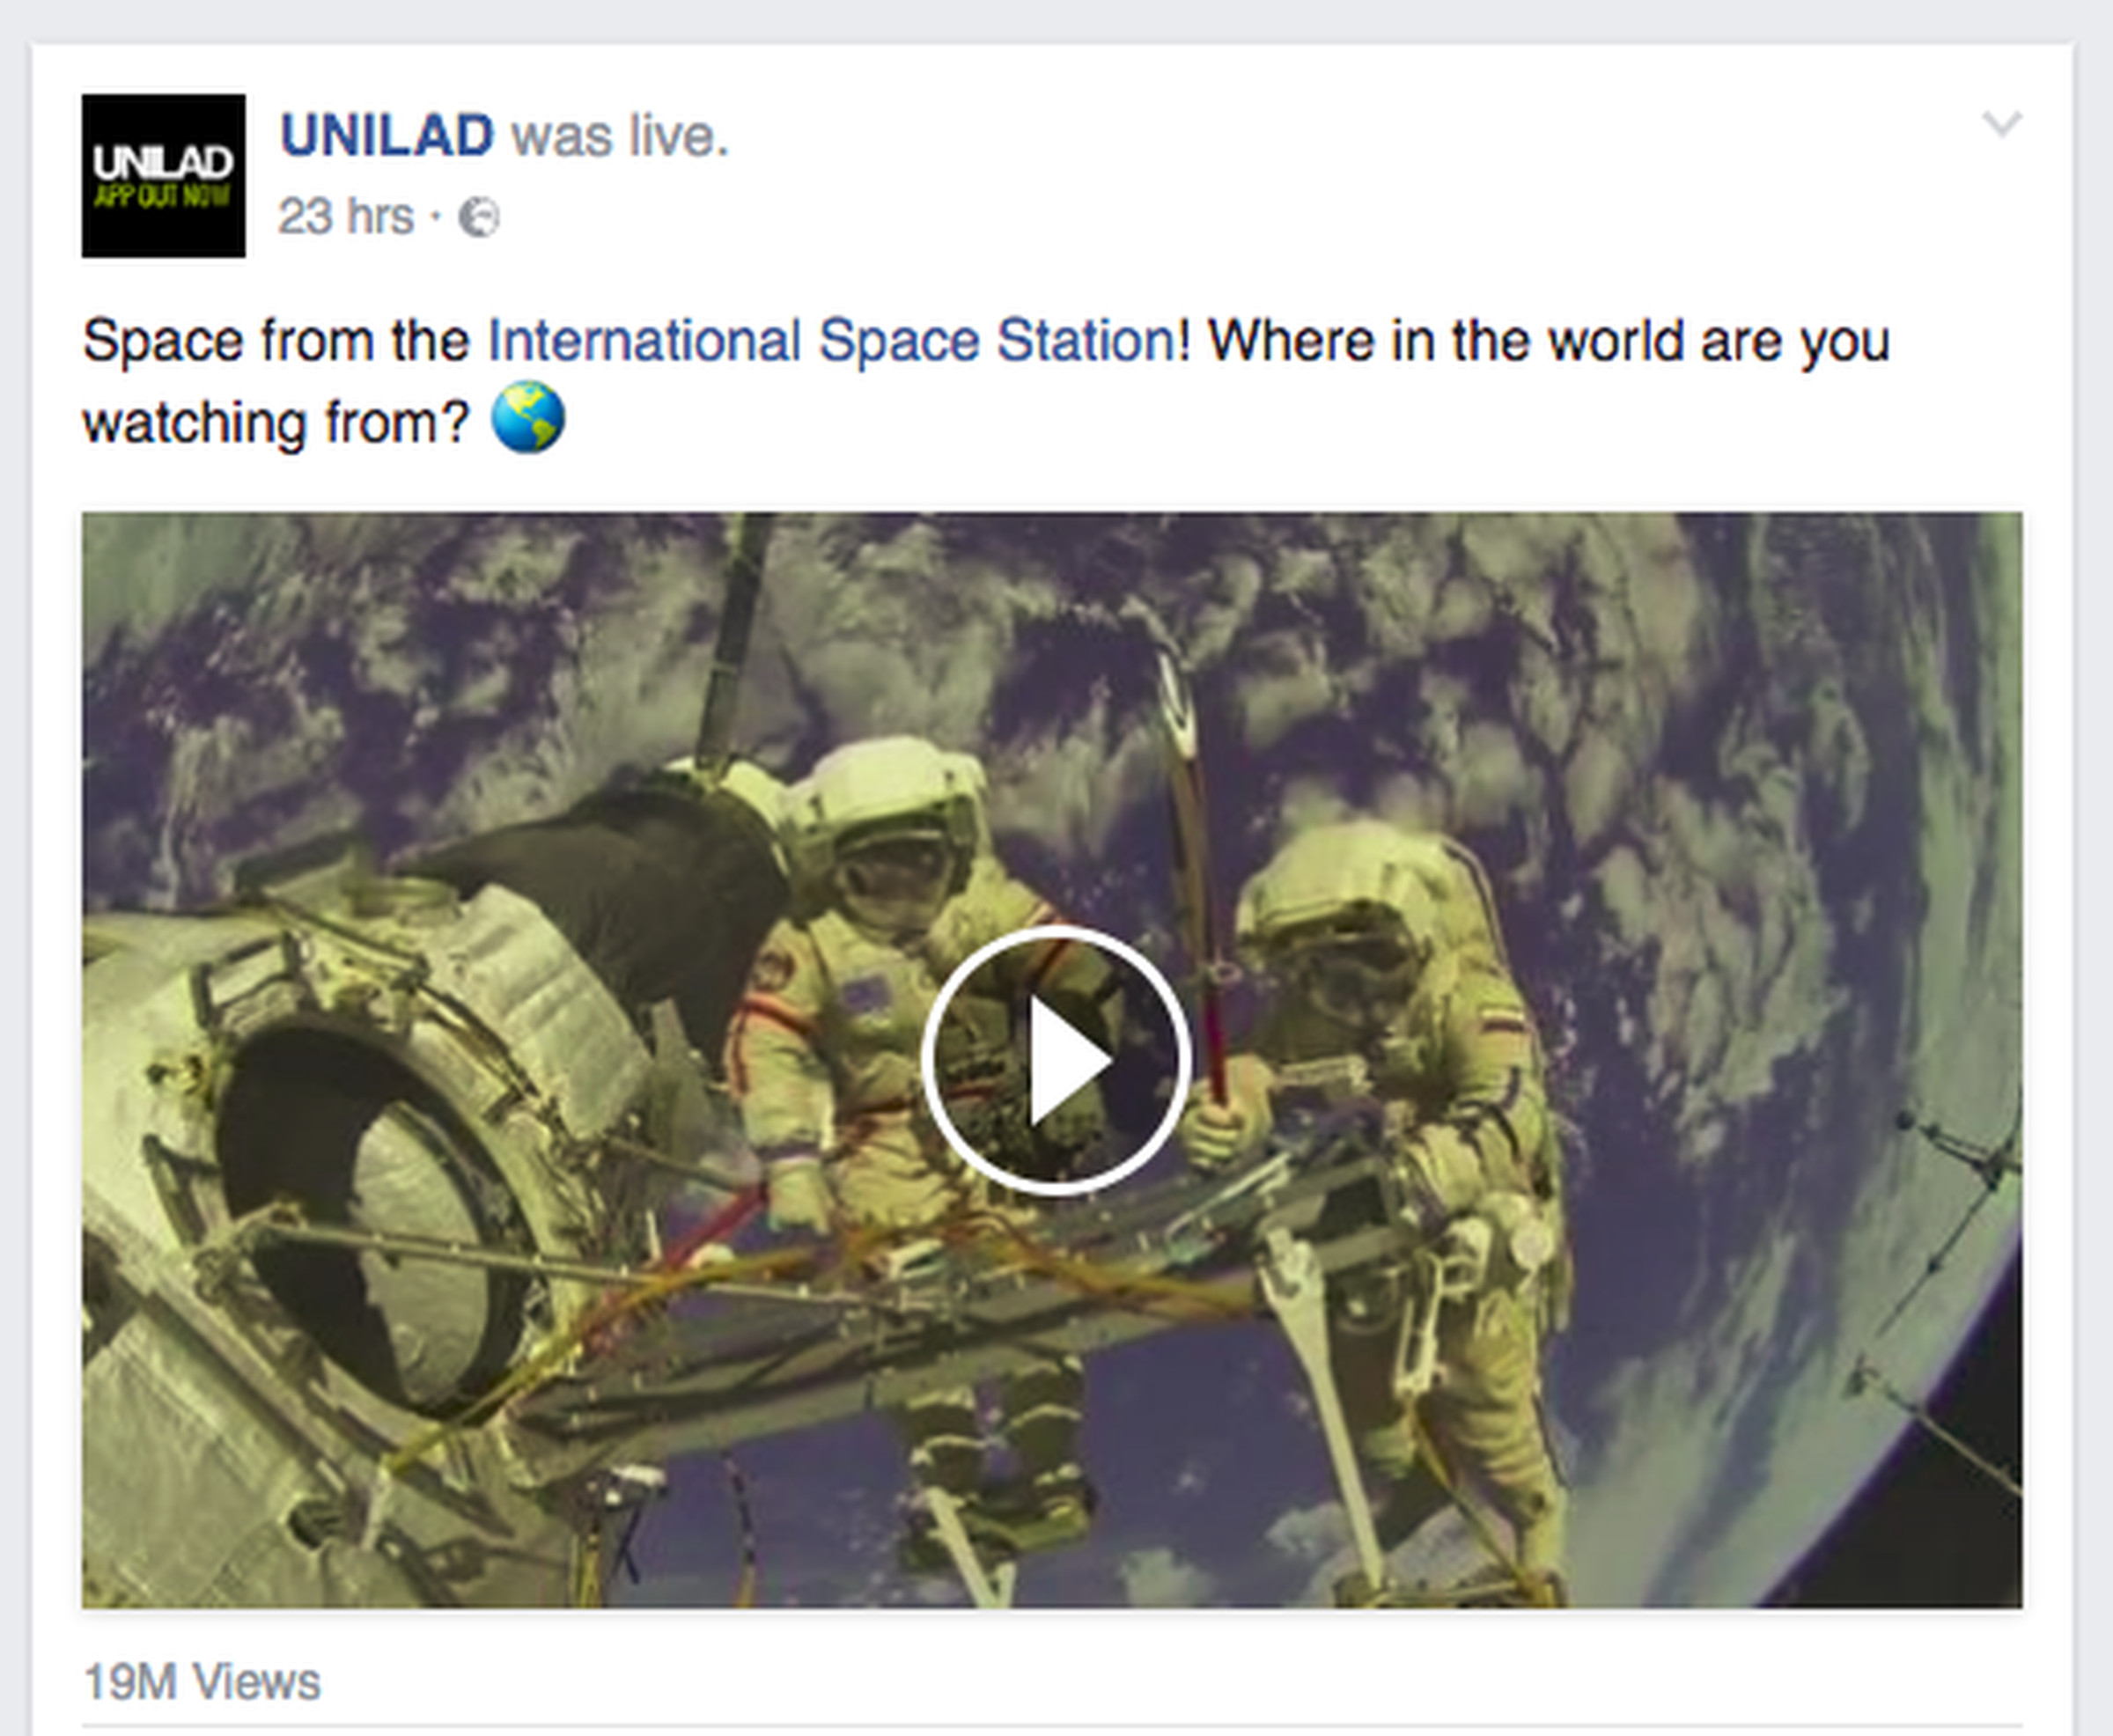 A screenshot showing UNILAD’s "live" stream from the ISS.